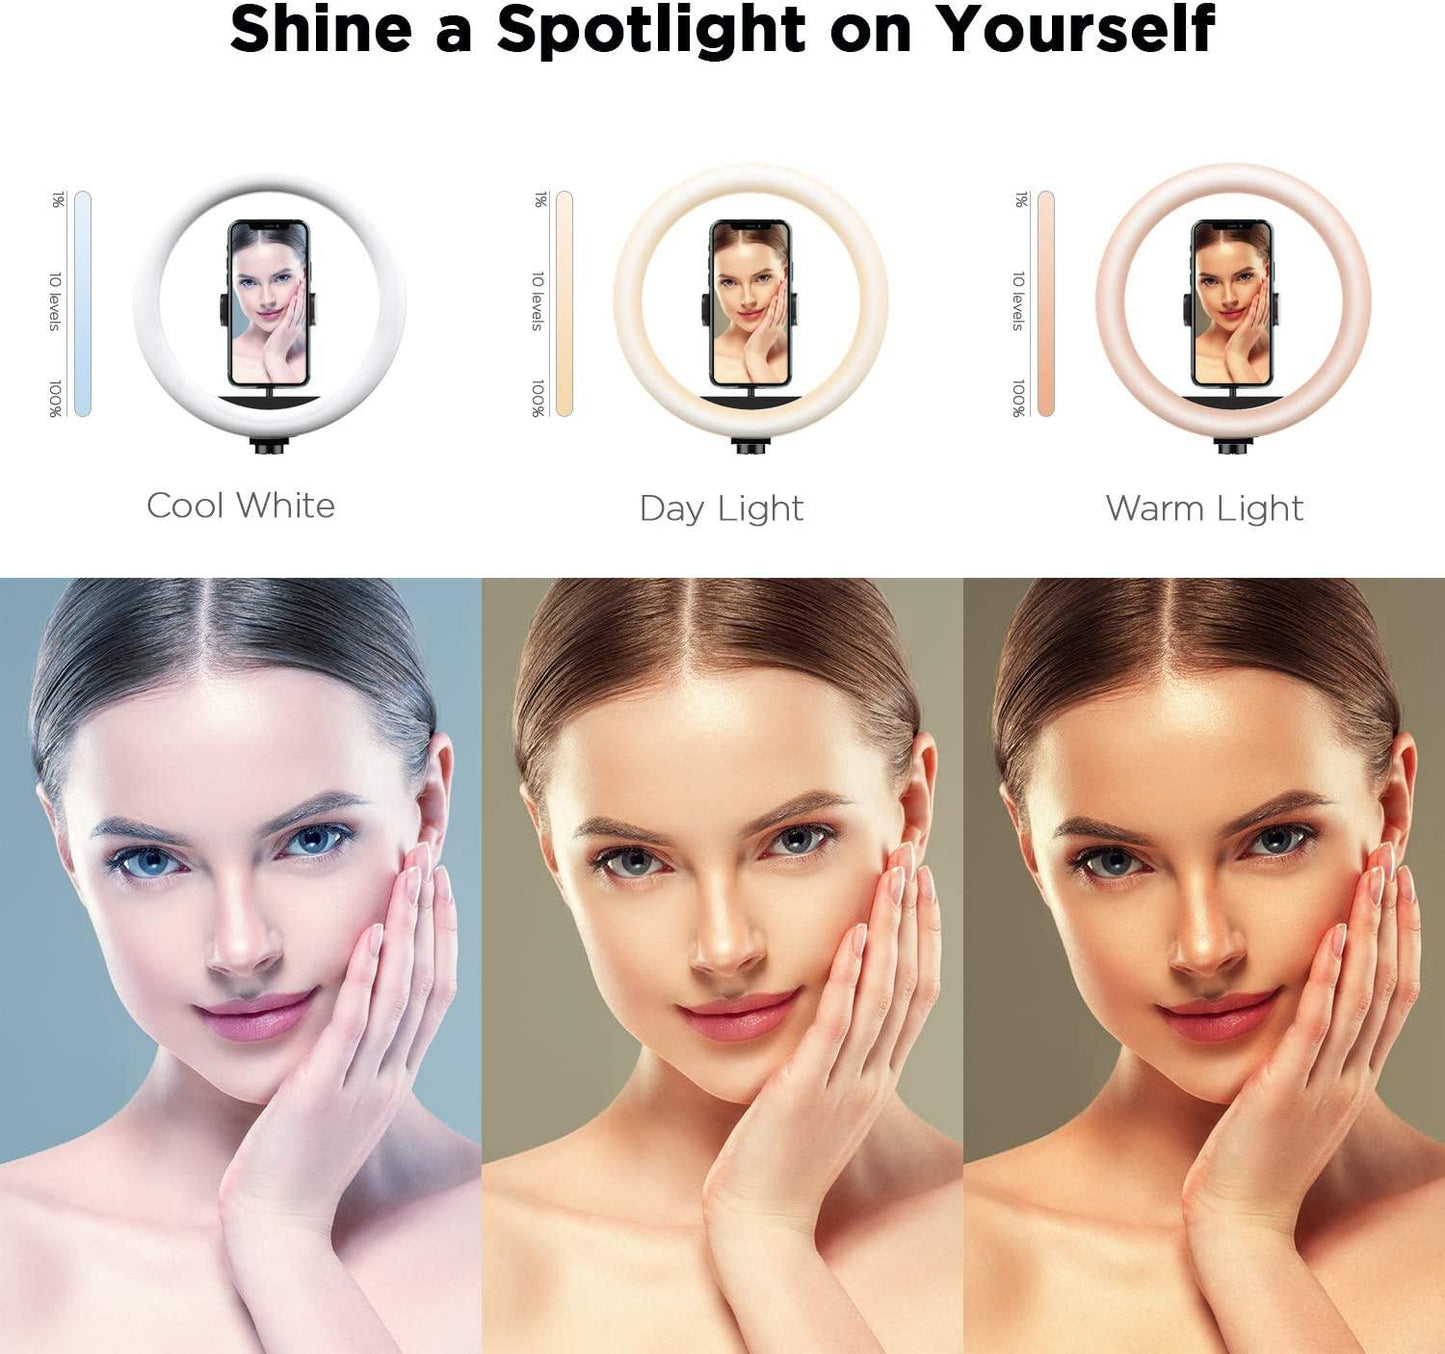 Showing Different light temperature on woman's face